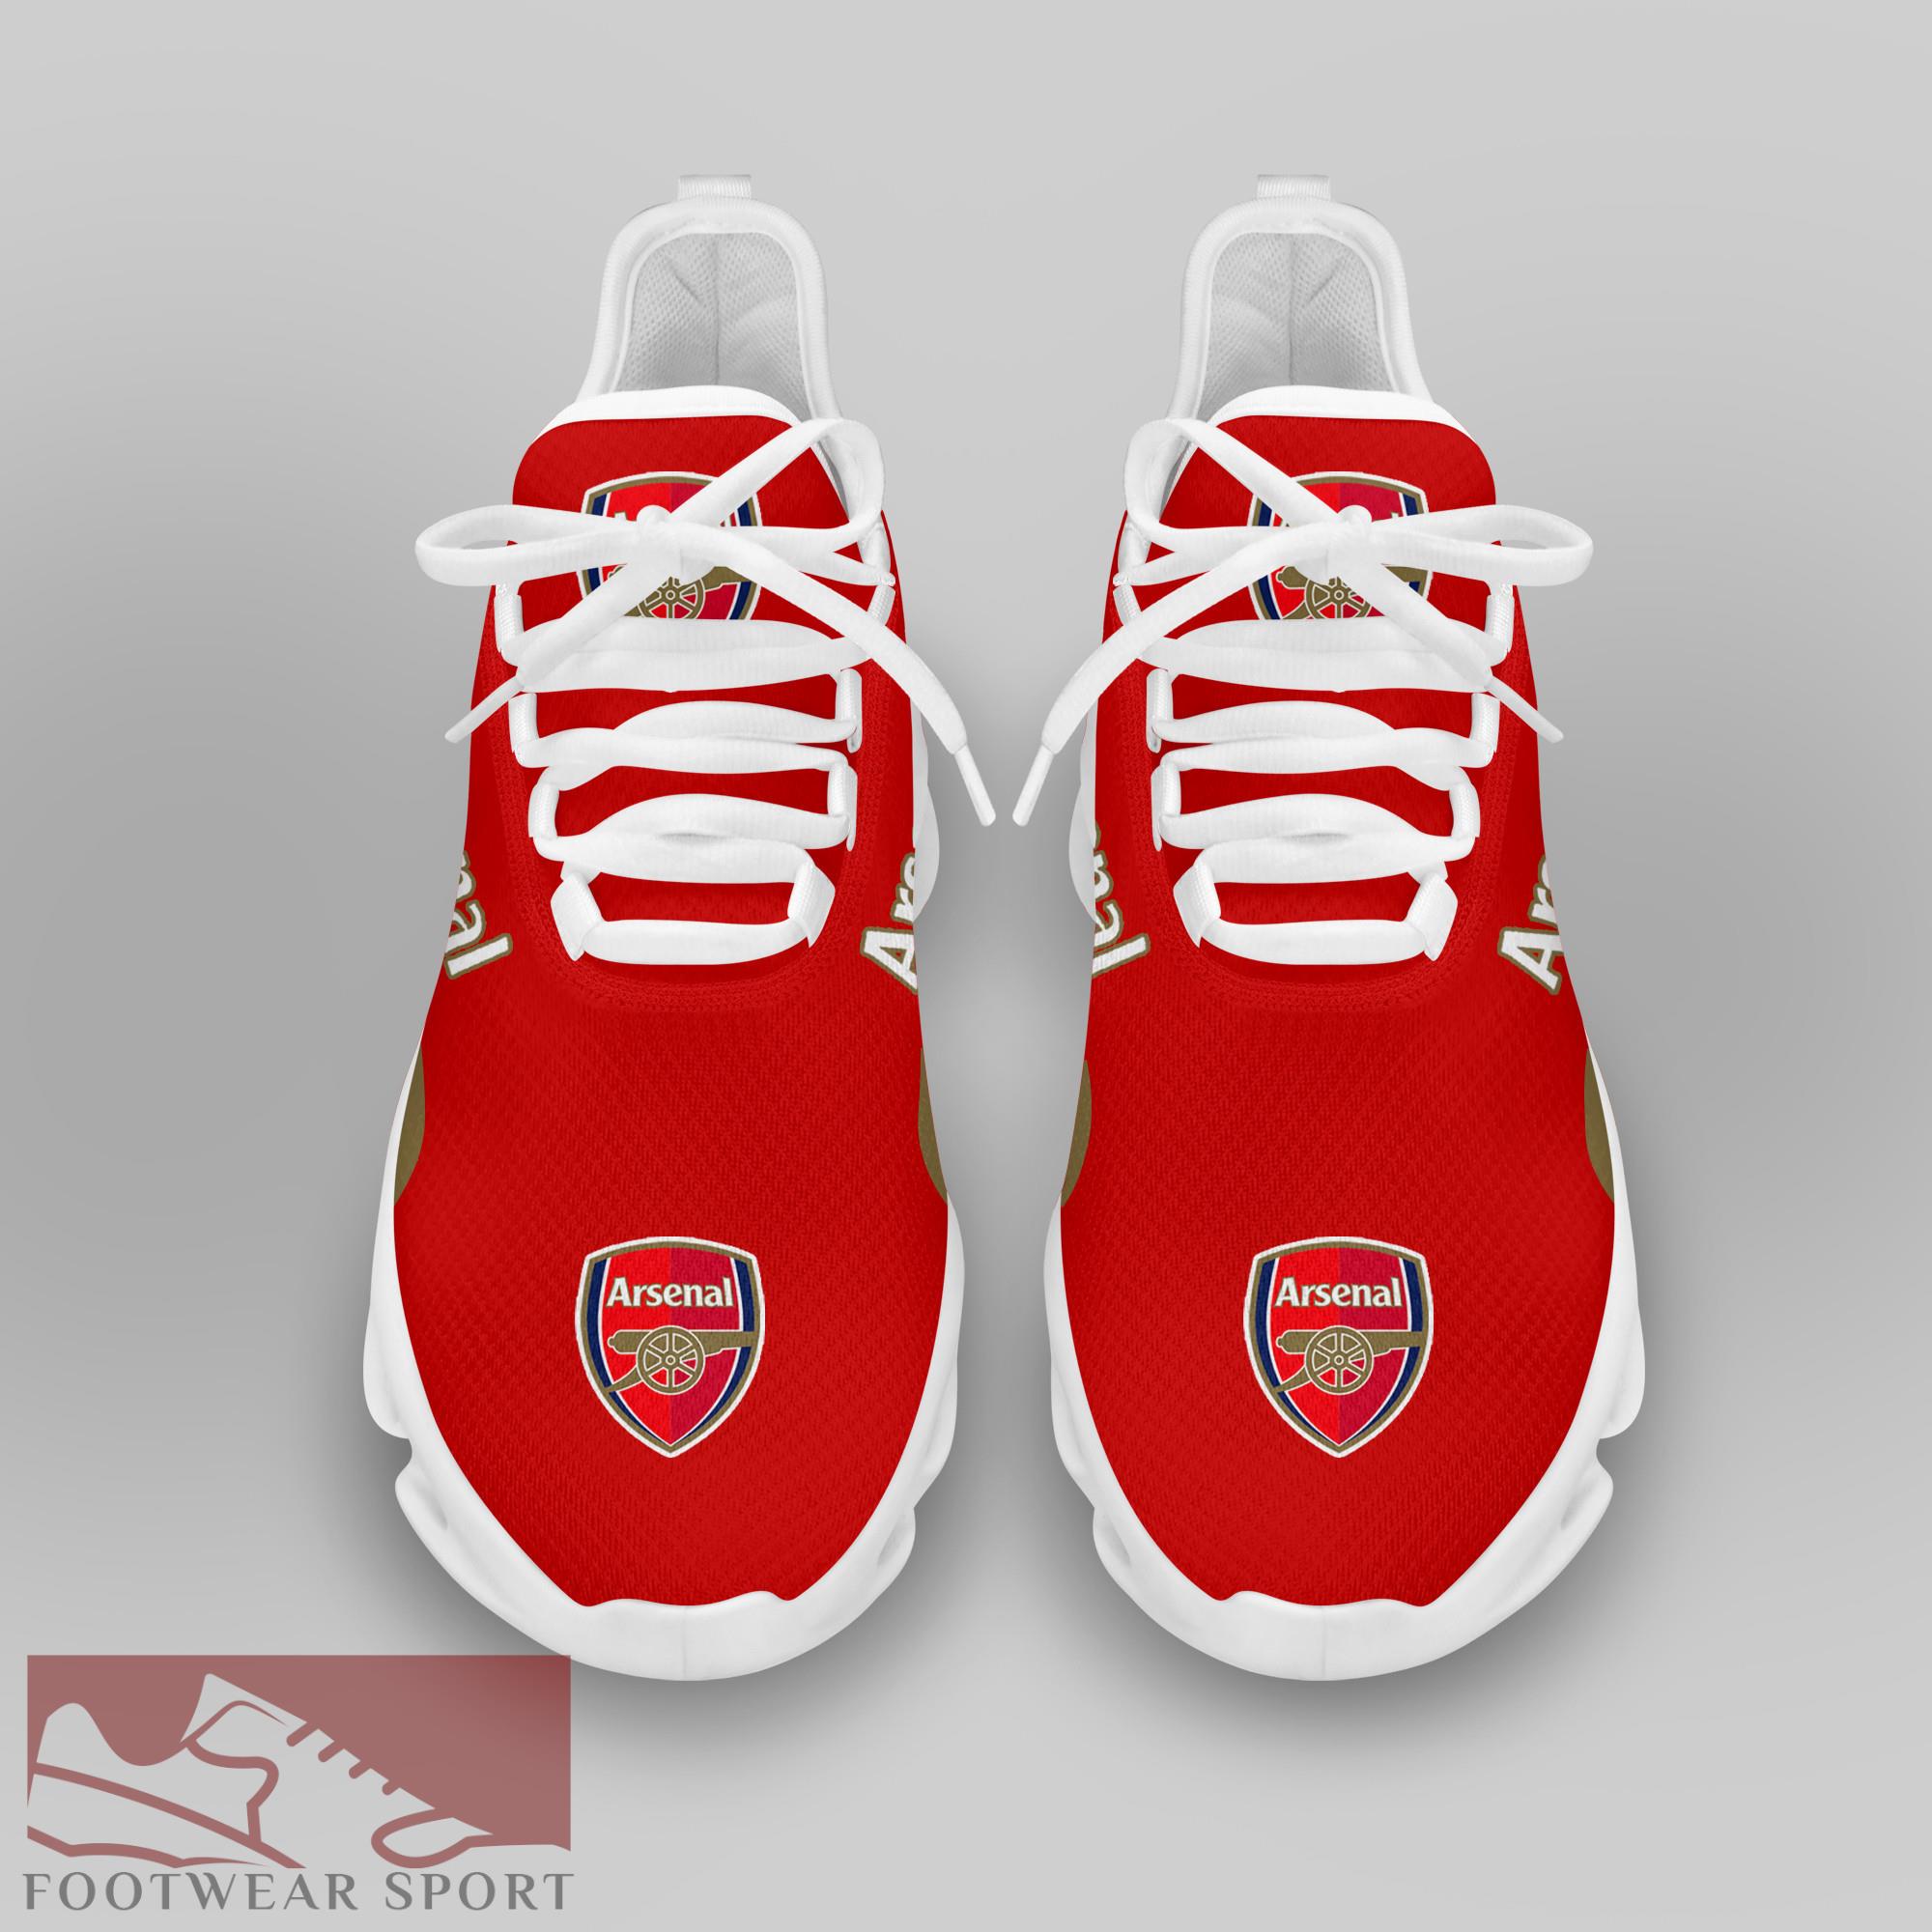 Arsenal Fans EPL Chunky Sneakers Elegance Max Soul Shoes For Men And Women - Arsenal Chunky Sneakers White Black Max Soul Shoes For Men And Women Photo 3